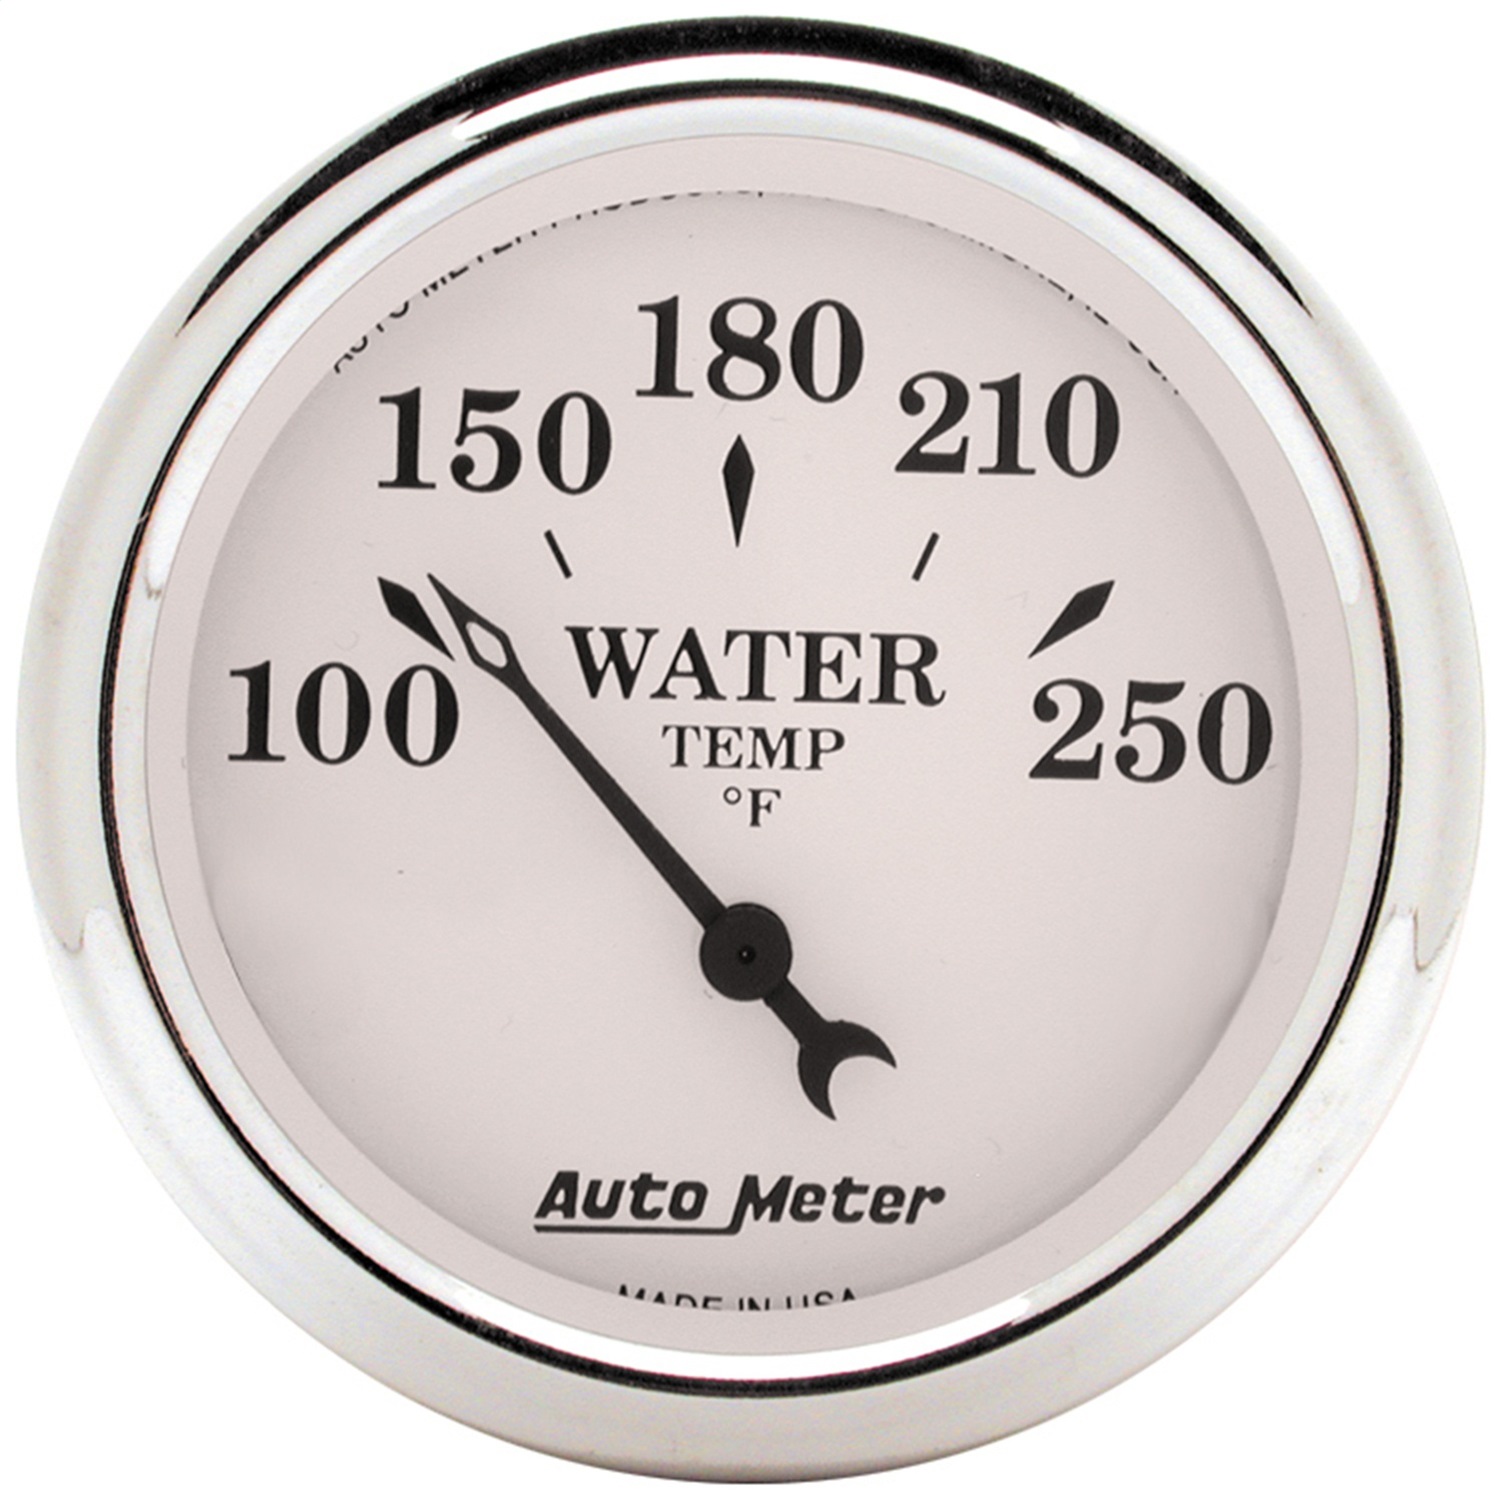 Auto Meter Auto Meter 1638 Old Tyme White; Electric Water Temperature Gauge